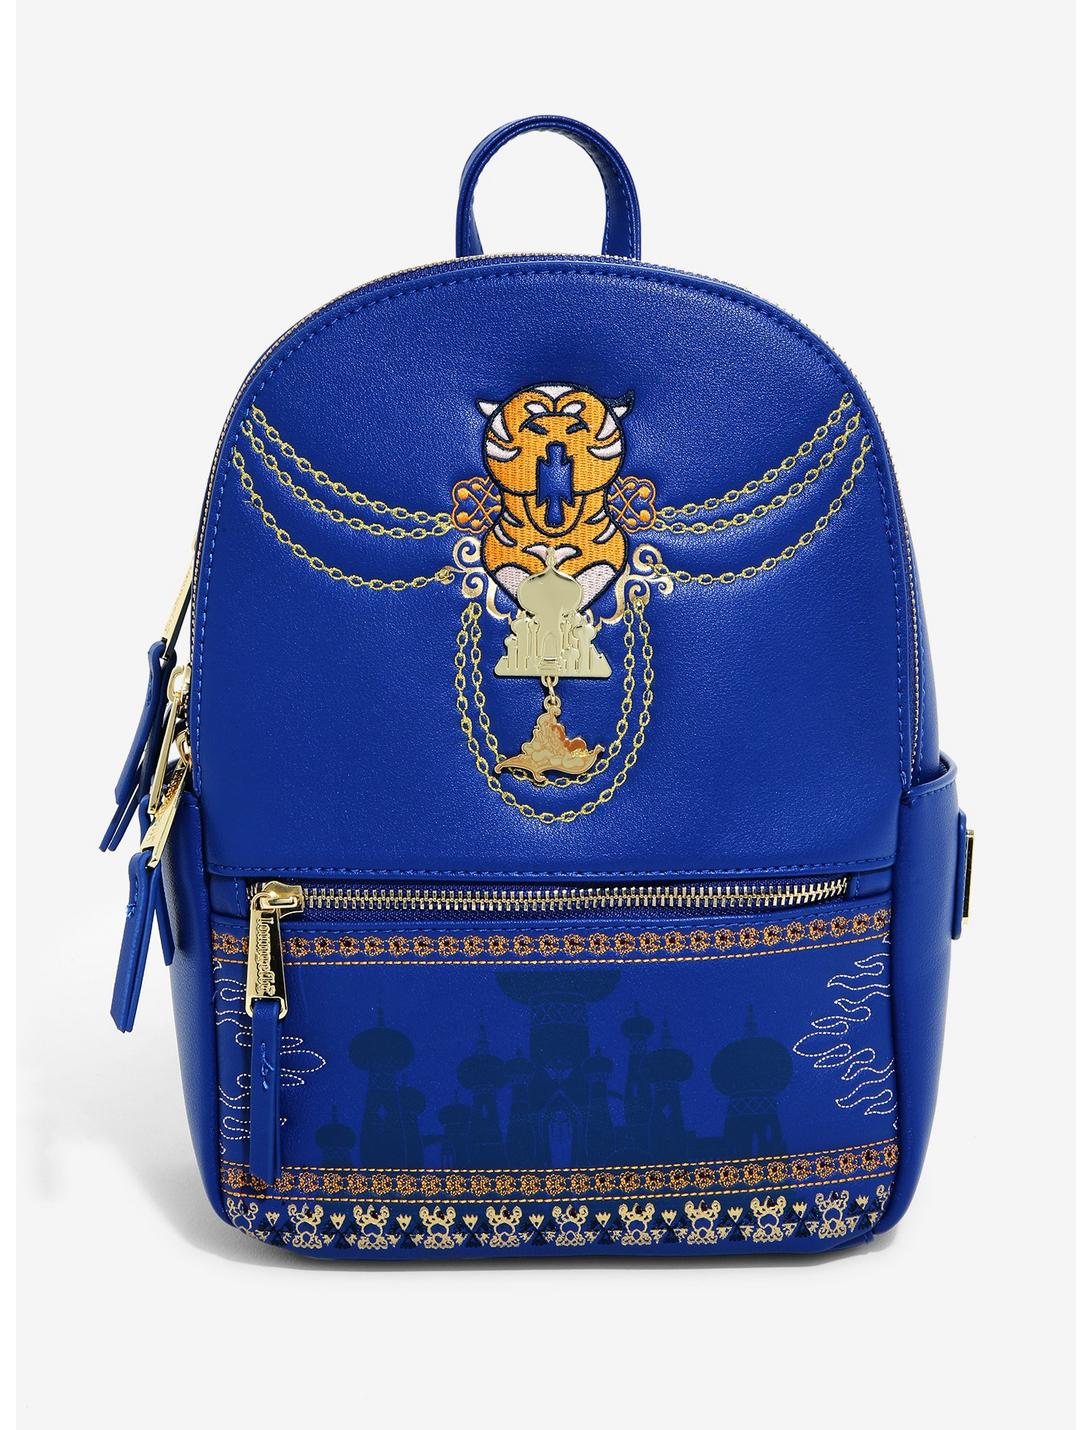 Loungefly Disney Aladdin Agrabah Mini Backpack - BoxLunch Exclusive, , hi-res